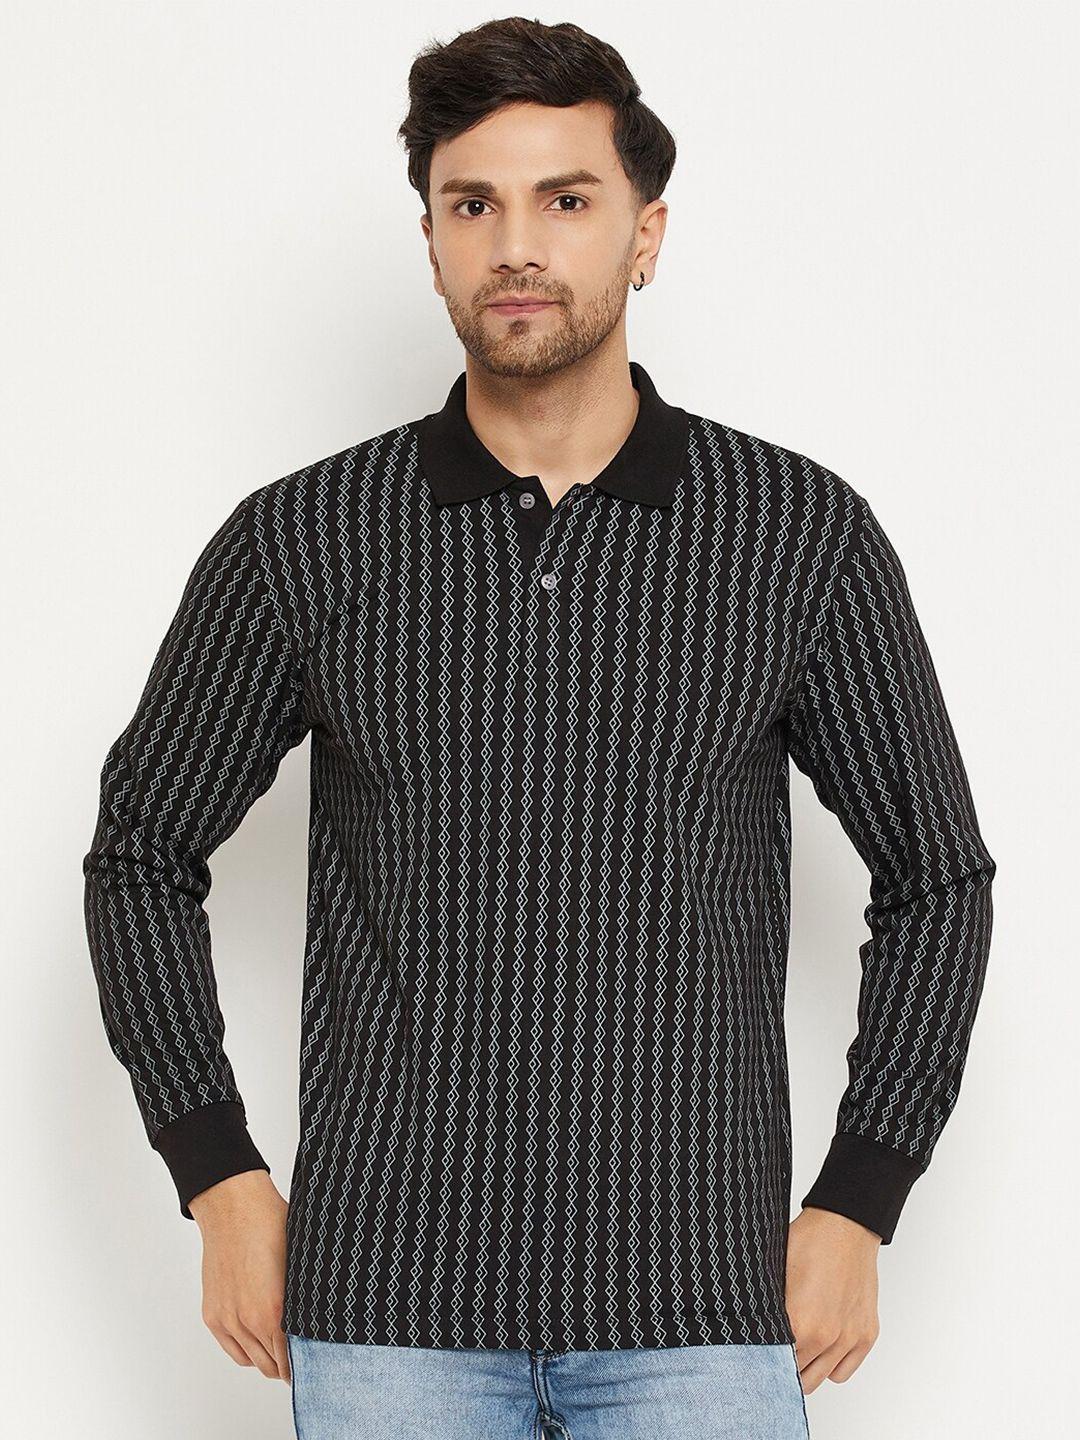 wild west striped polo collar t-shirt